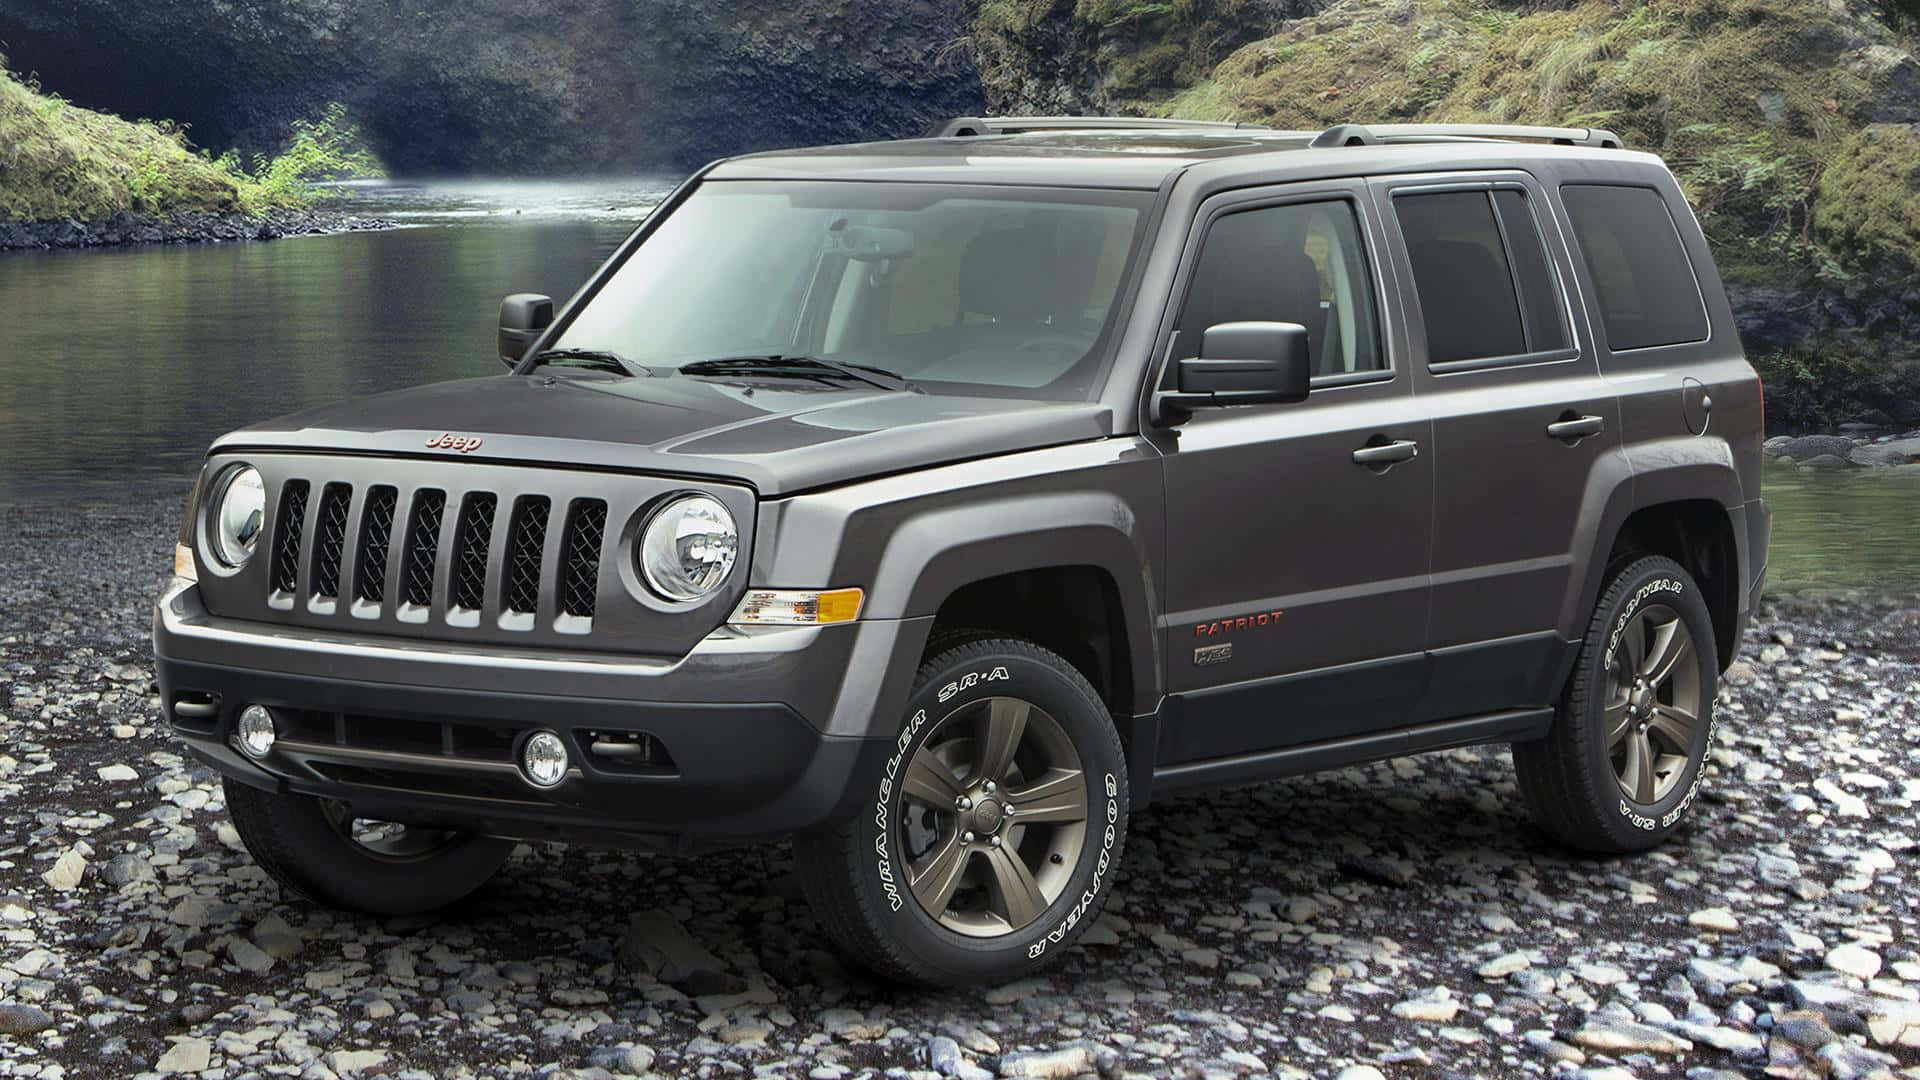 Caption: Rugged Jeep Patriot SUV on an Off-Road Adventure Wallpaper